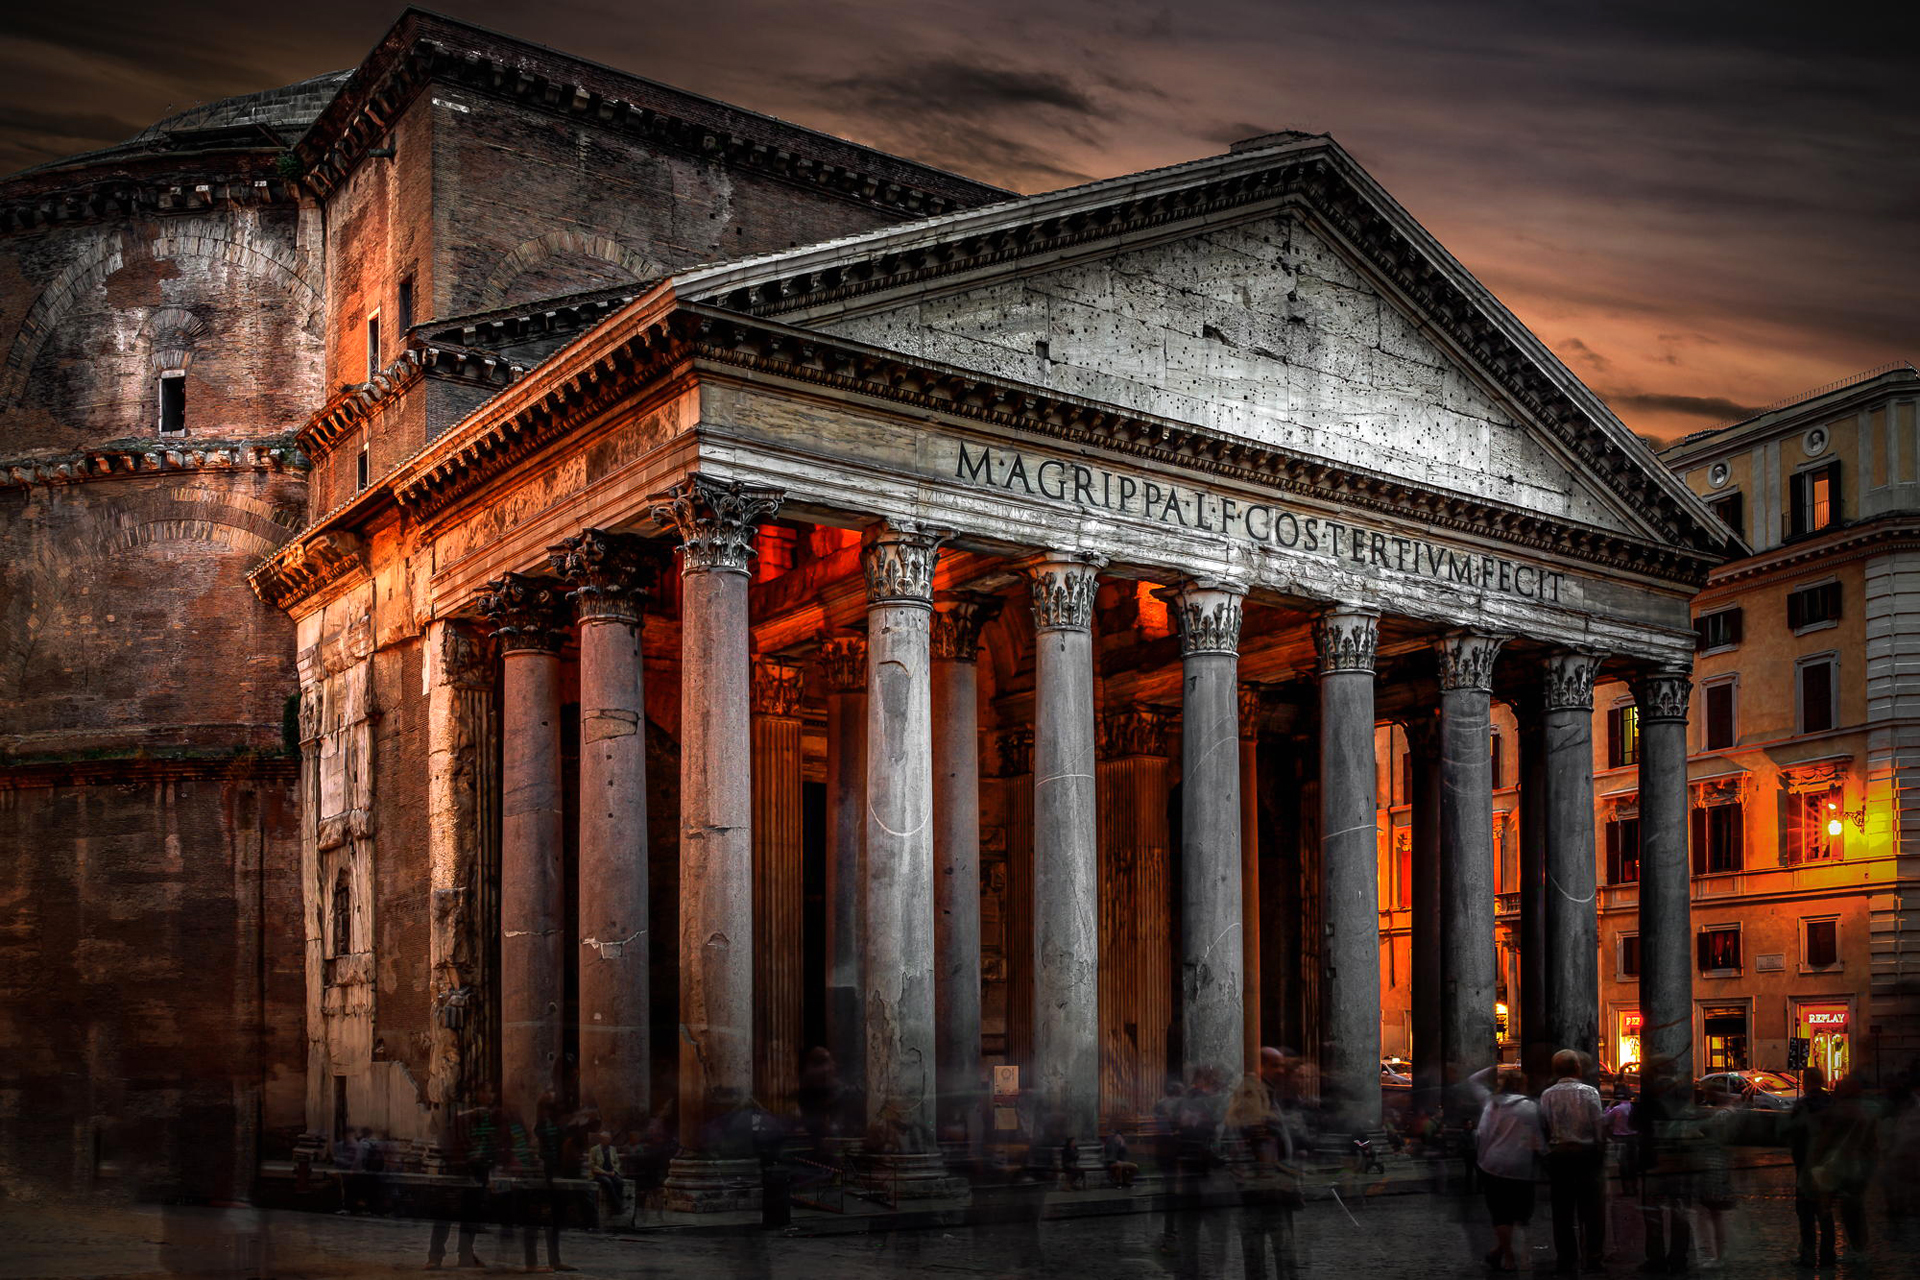 Italy Monument Pantheon Rome Time Lapse 1920x1280